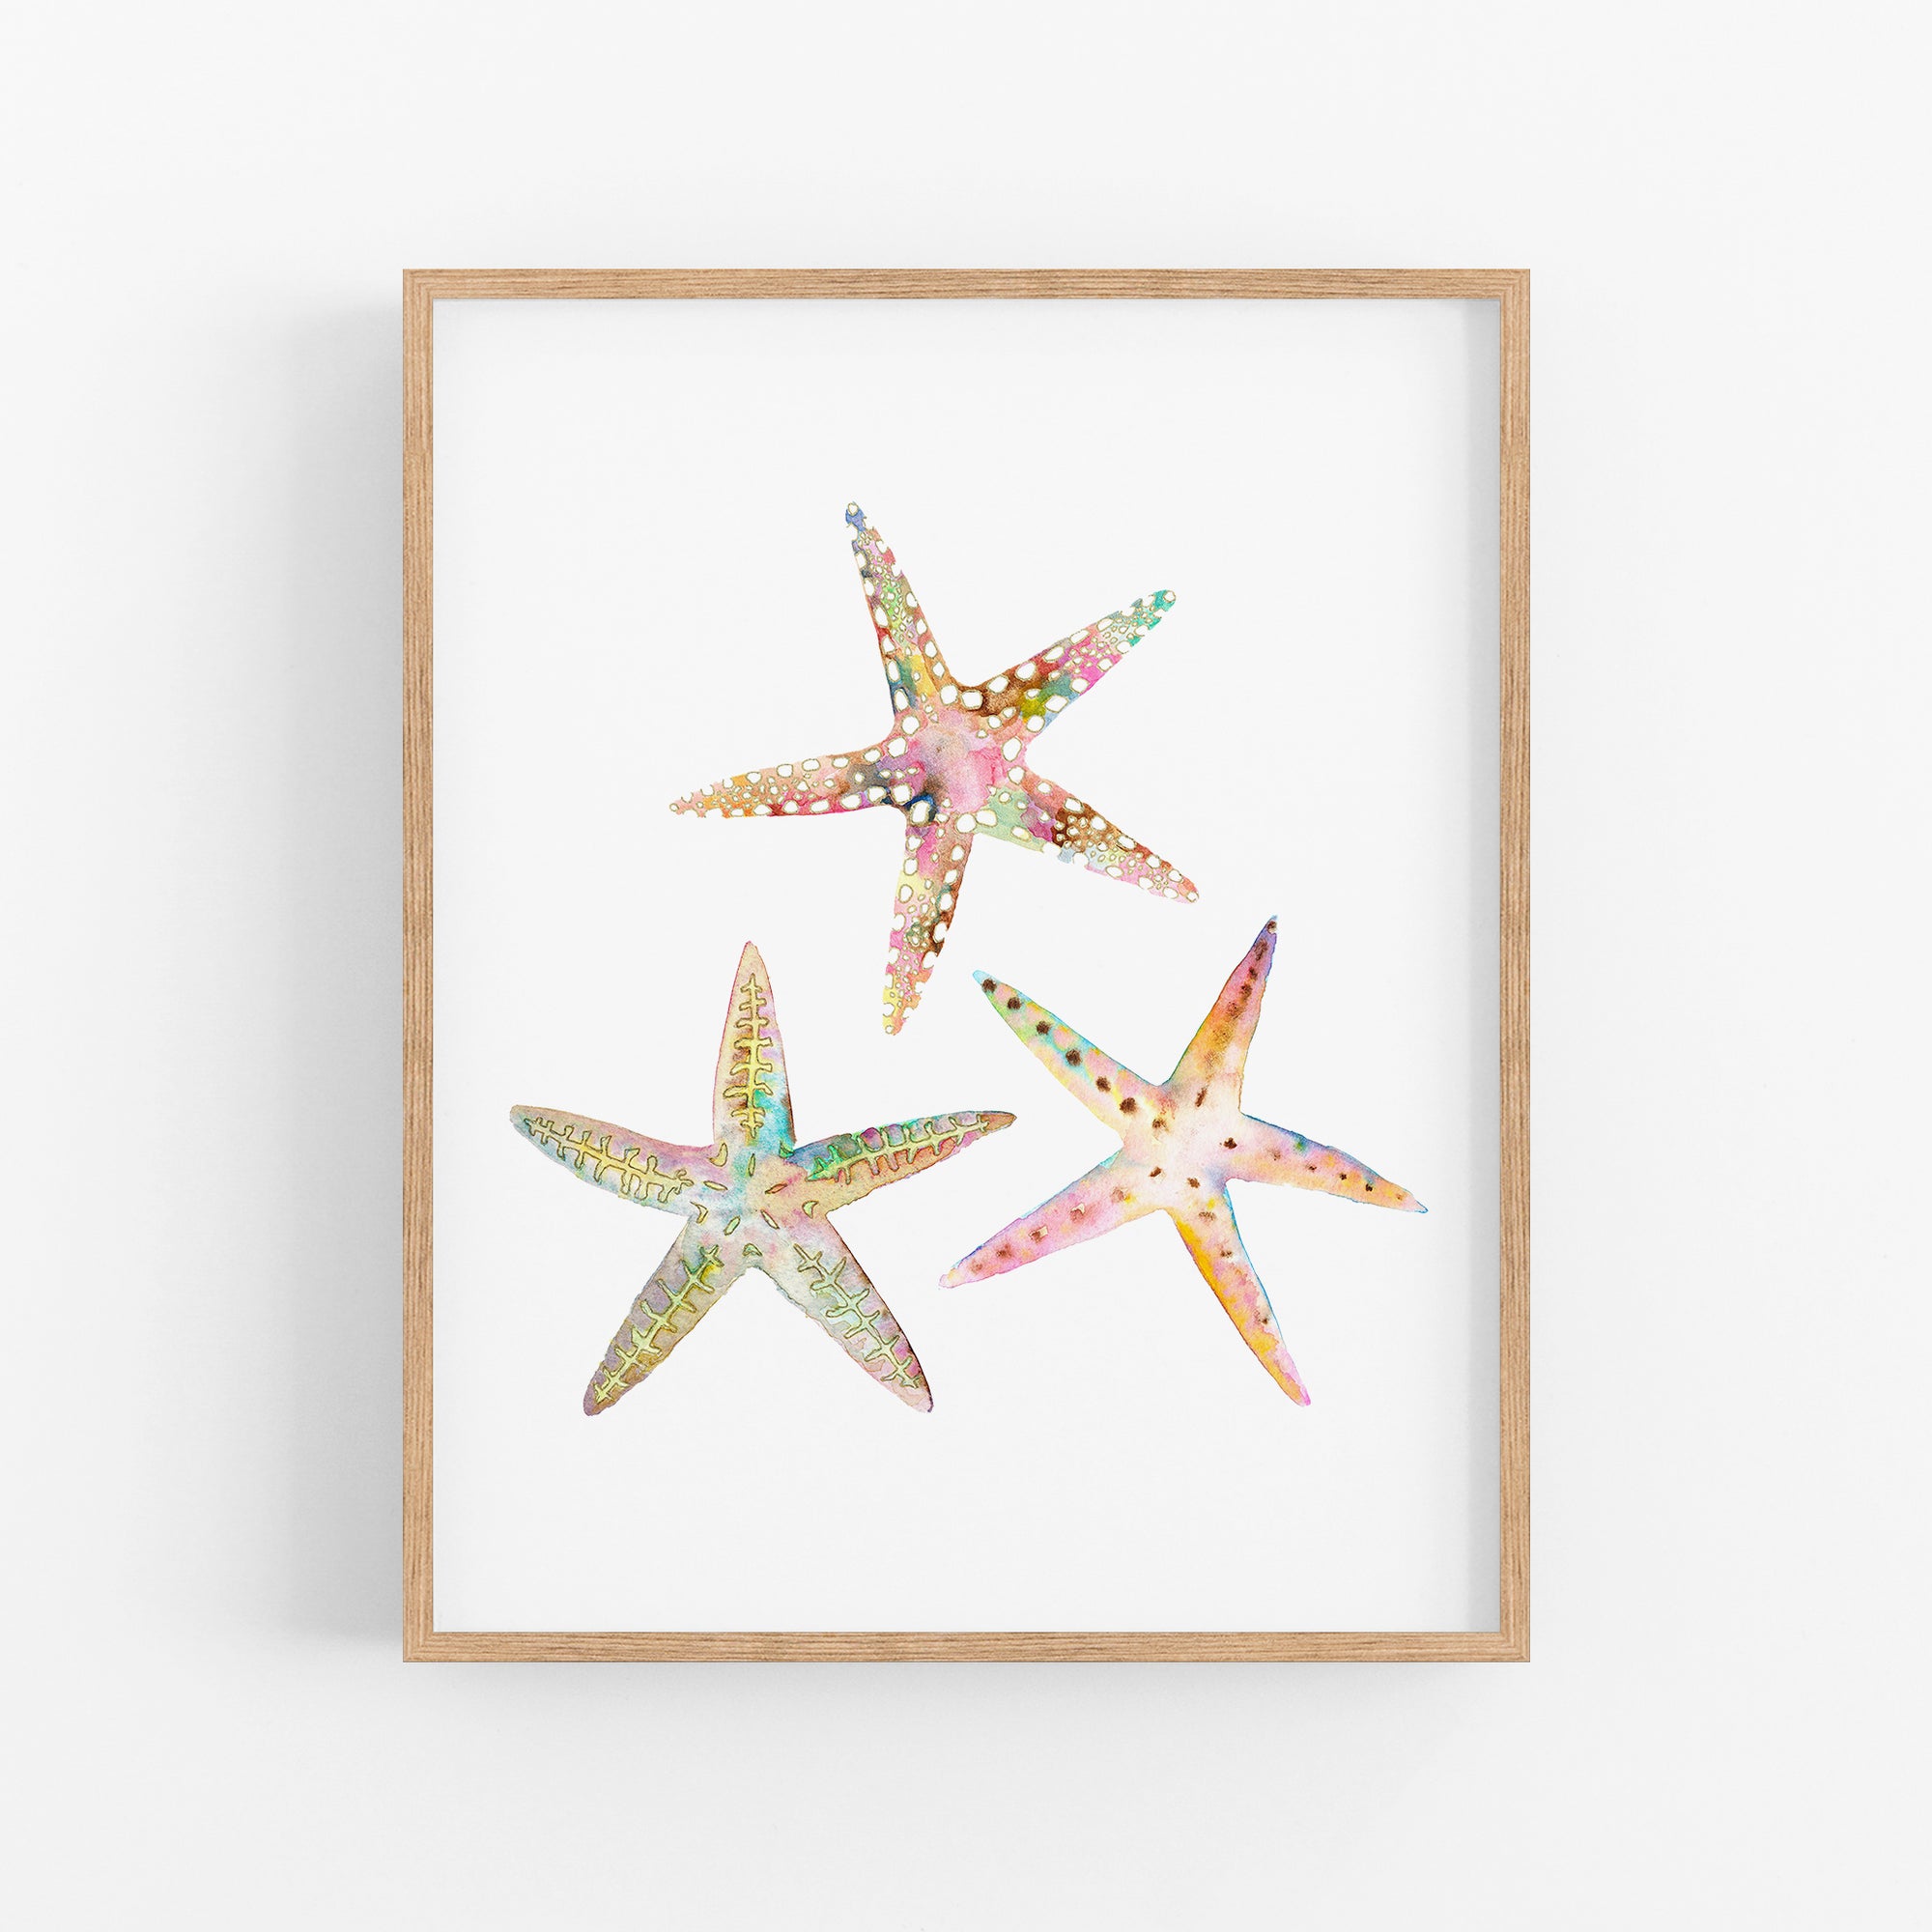 three starfishs in watercolor on a white background